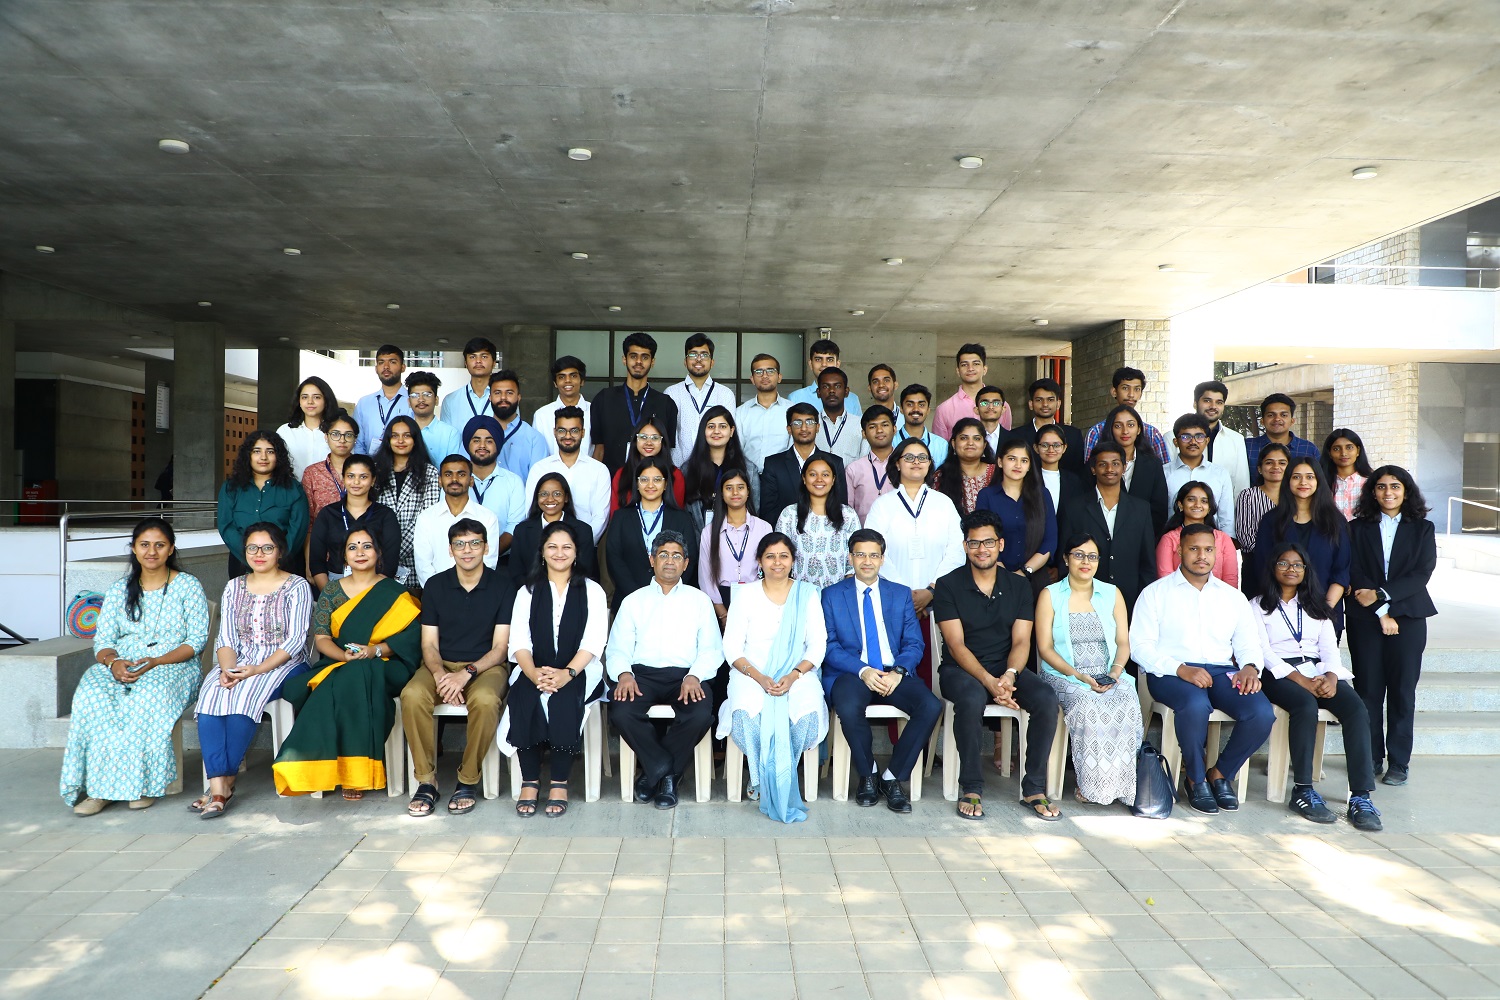 Participants of the summer course ‘Foundations of Management’, conducted by the Centre for Teaching and Learning (CTL) at IIM Bangalore, on 17th April 2023.